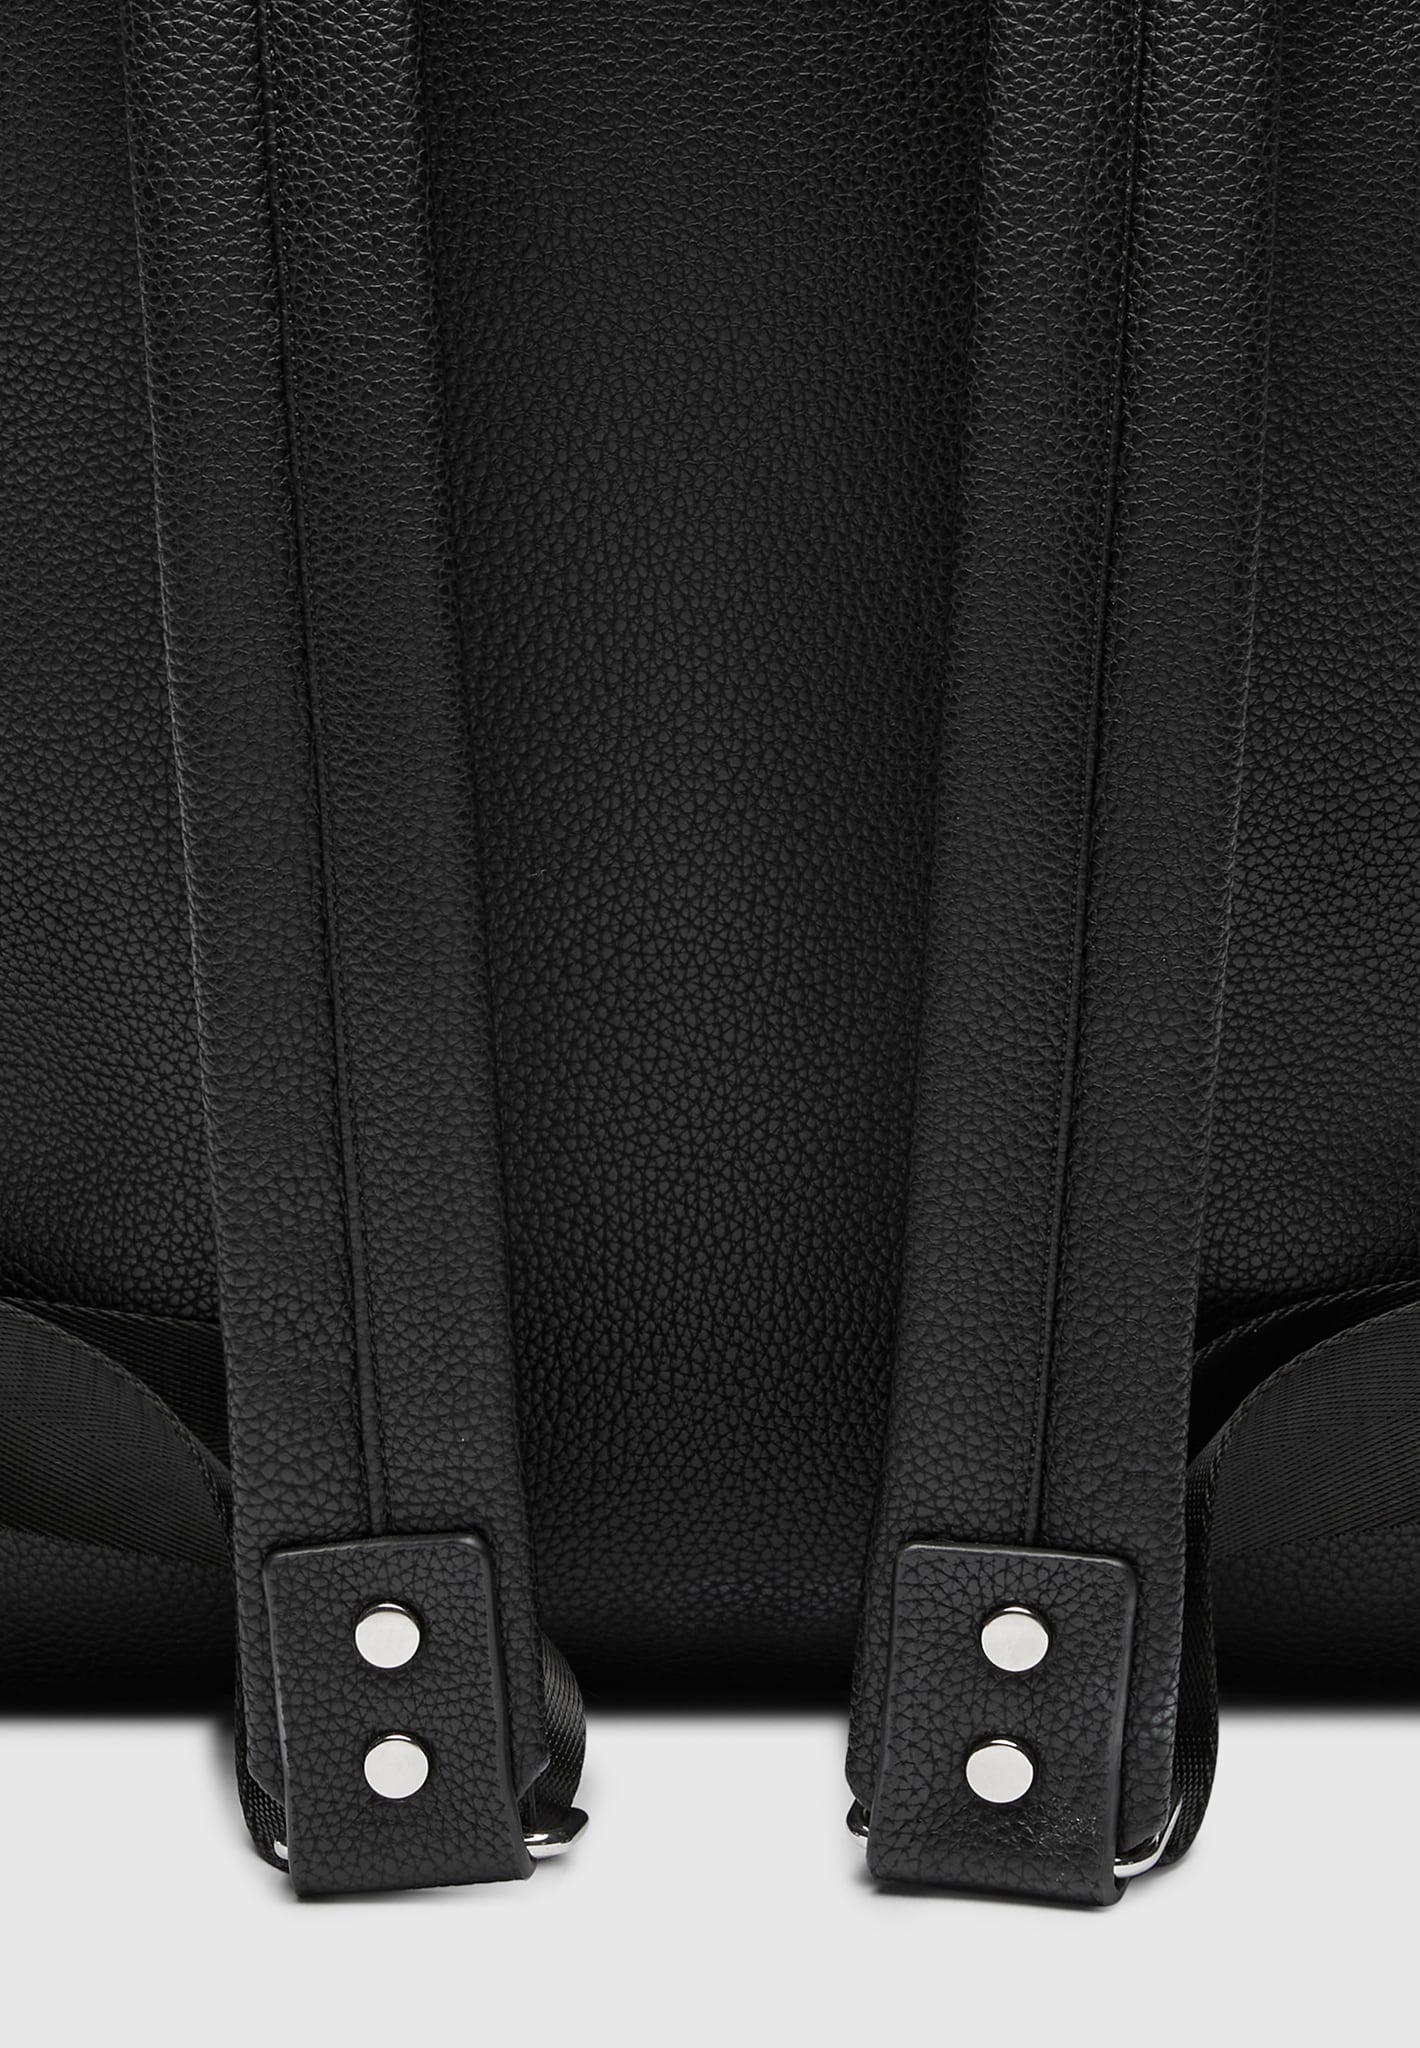 vegan-leather-backpack-with-suede-panel-black-2